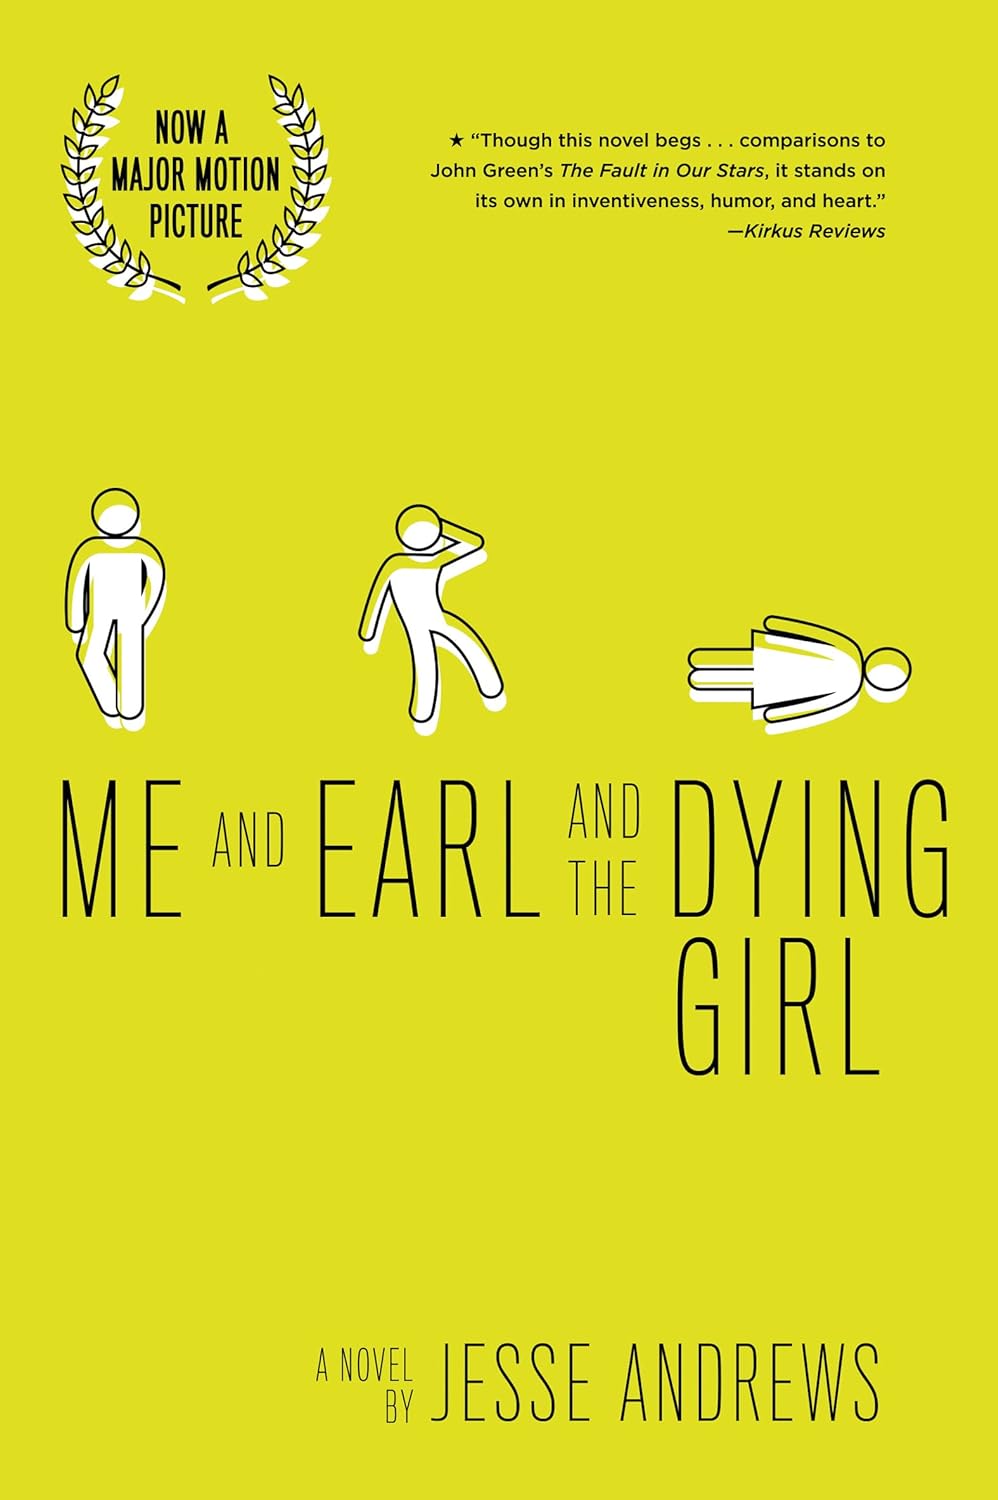 me and earl and the dying girl book jacket